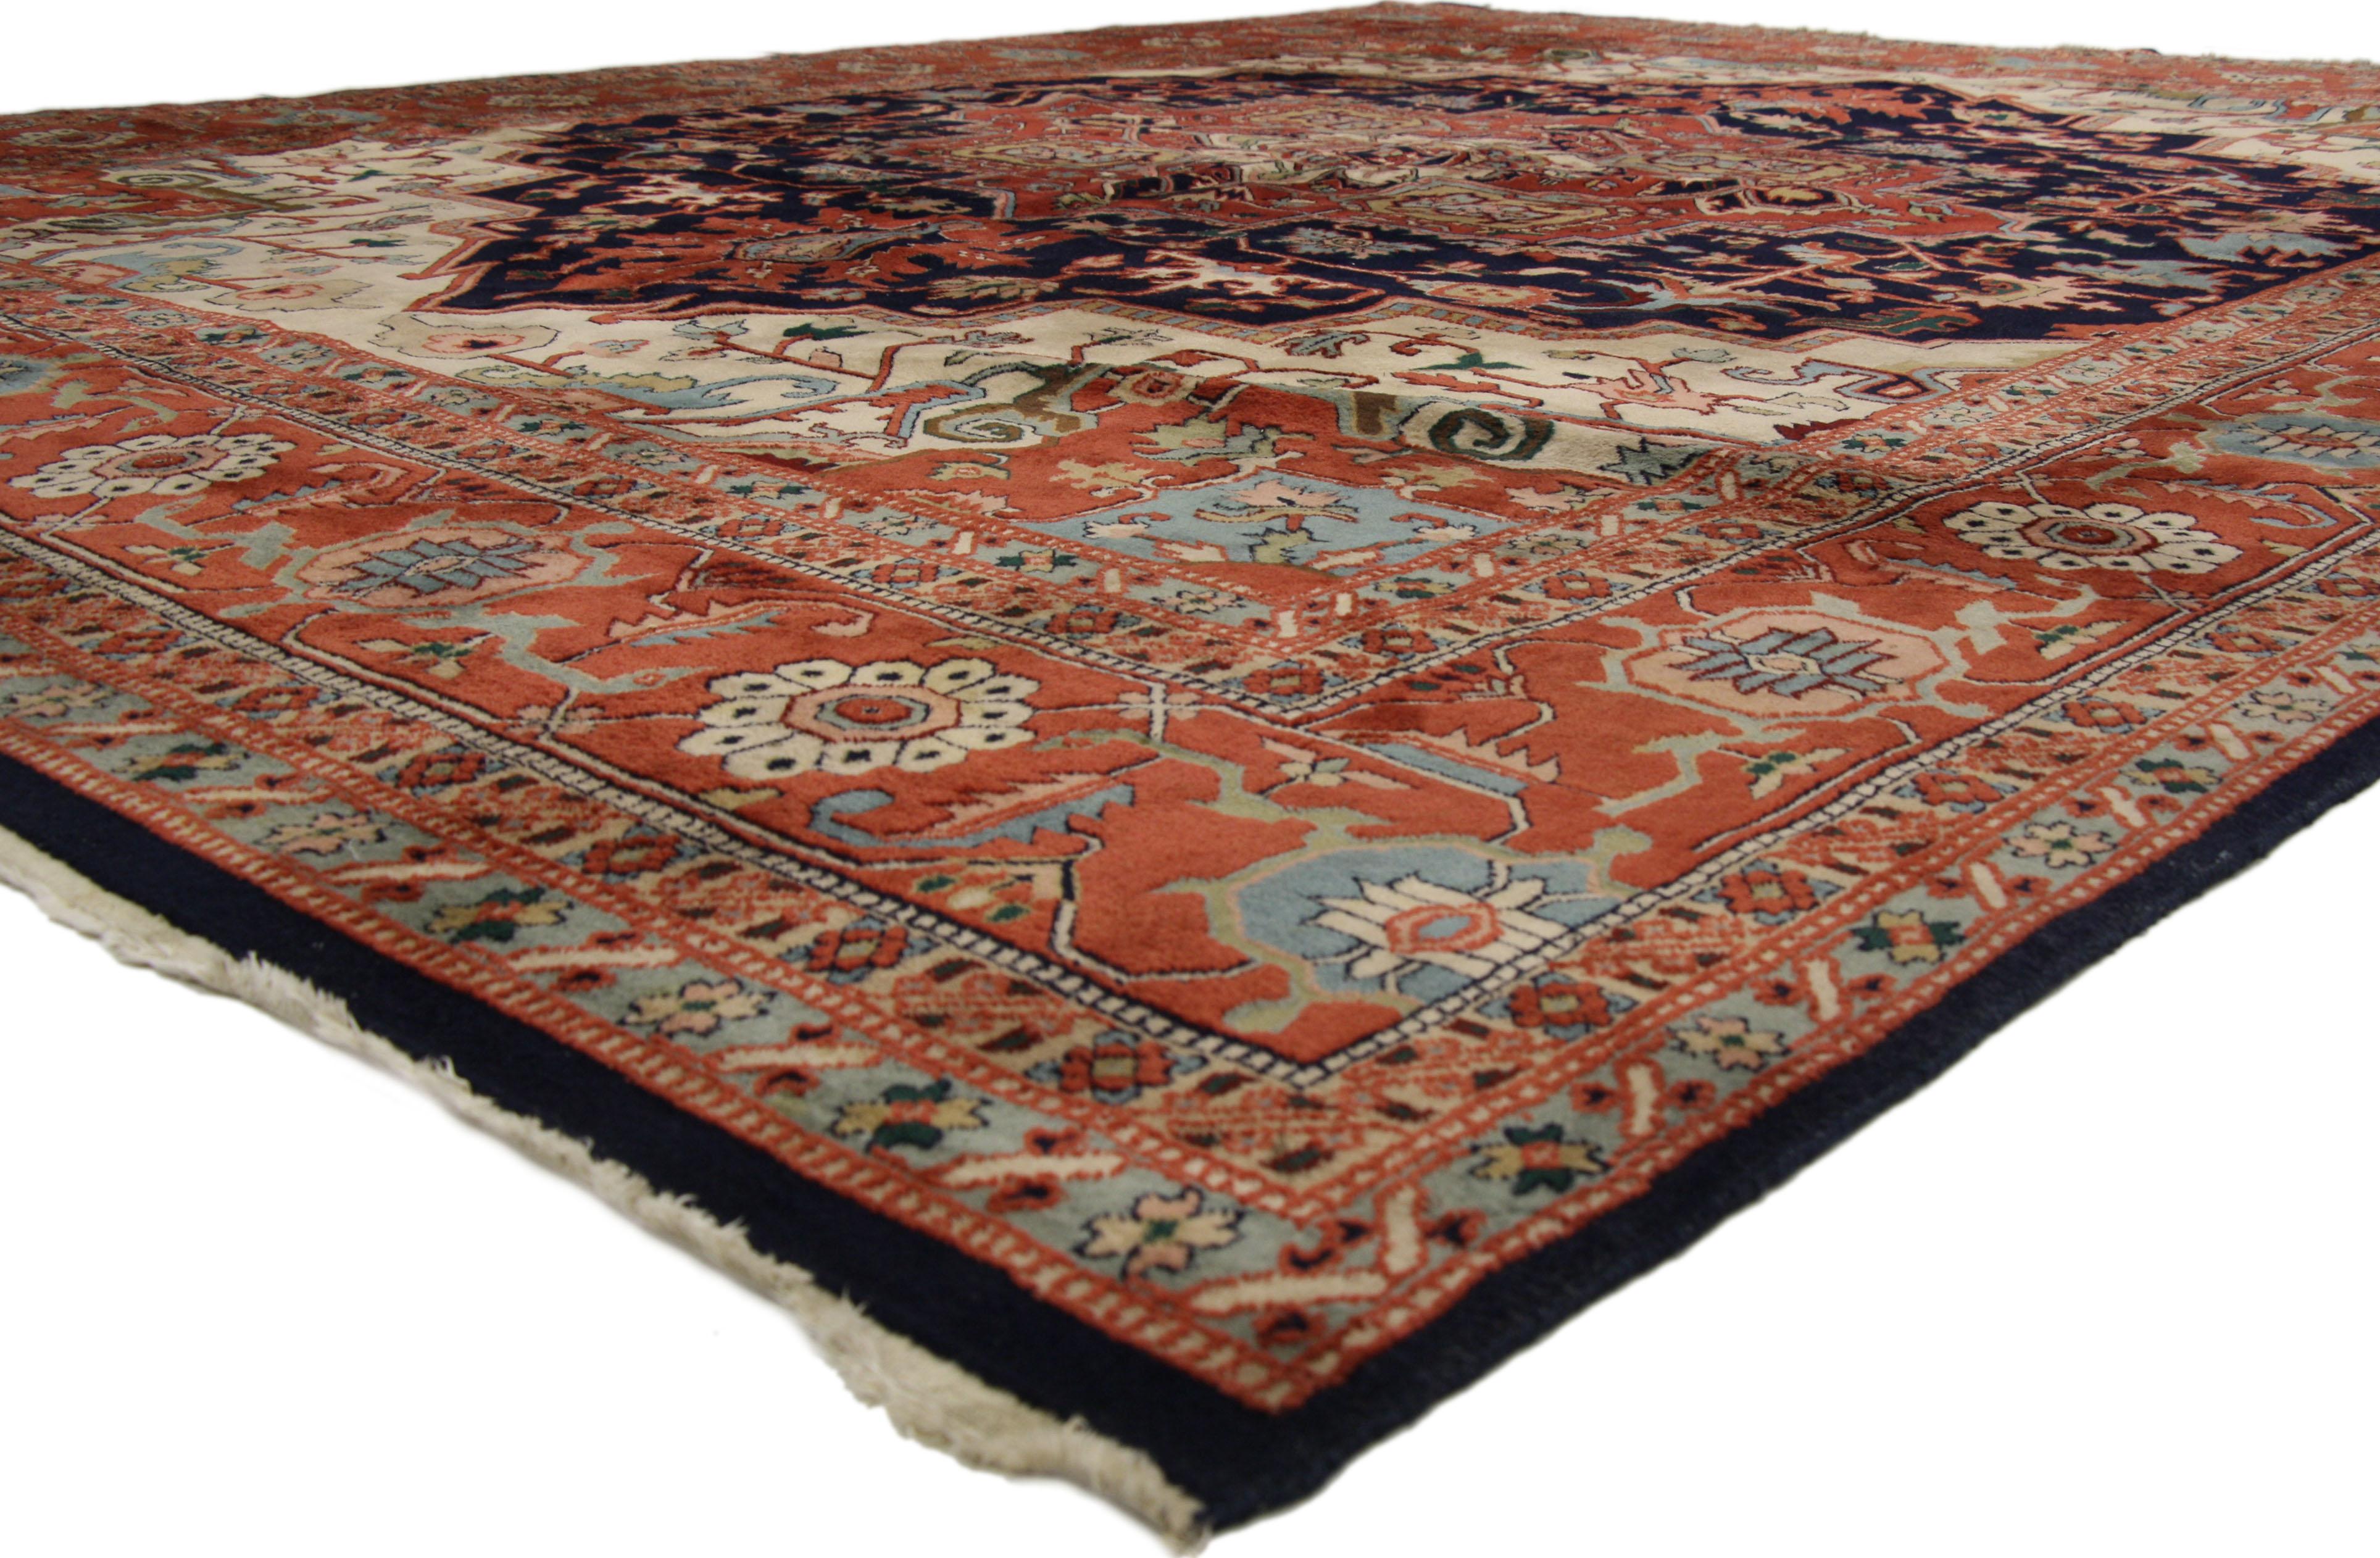 74402 Vintage Persian Heriz Rug with Modern English Manor Style. Traditional and regal with brilliant color, this hand knotted wool vintage Persian Heriz rug is comprised of a prominent octogonal medallion flanked with two dramatic pendants floating